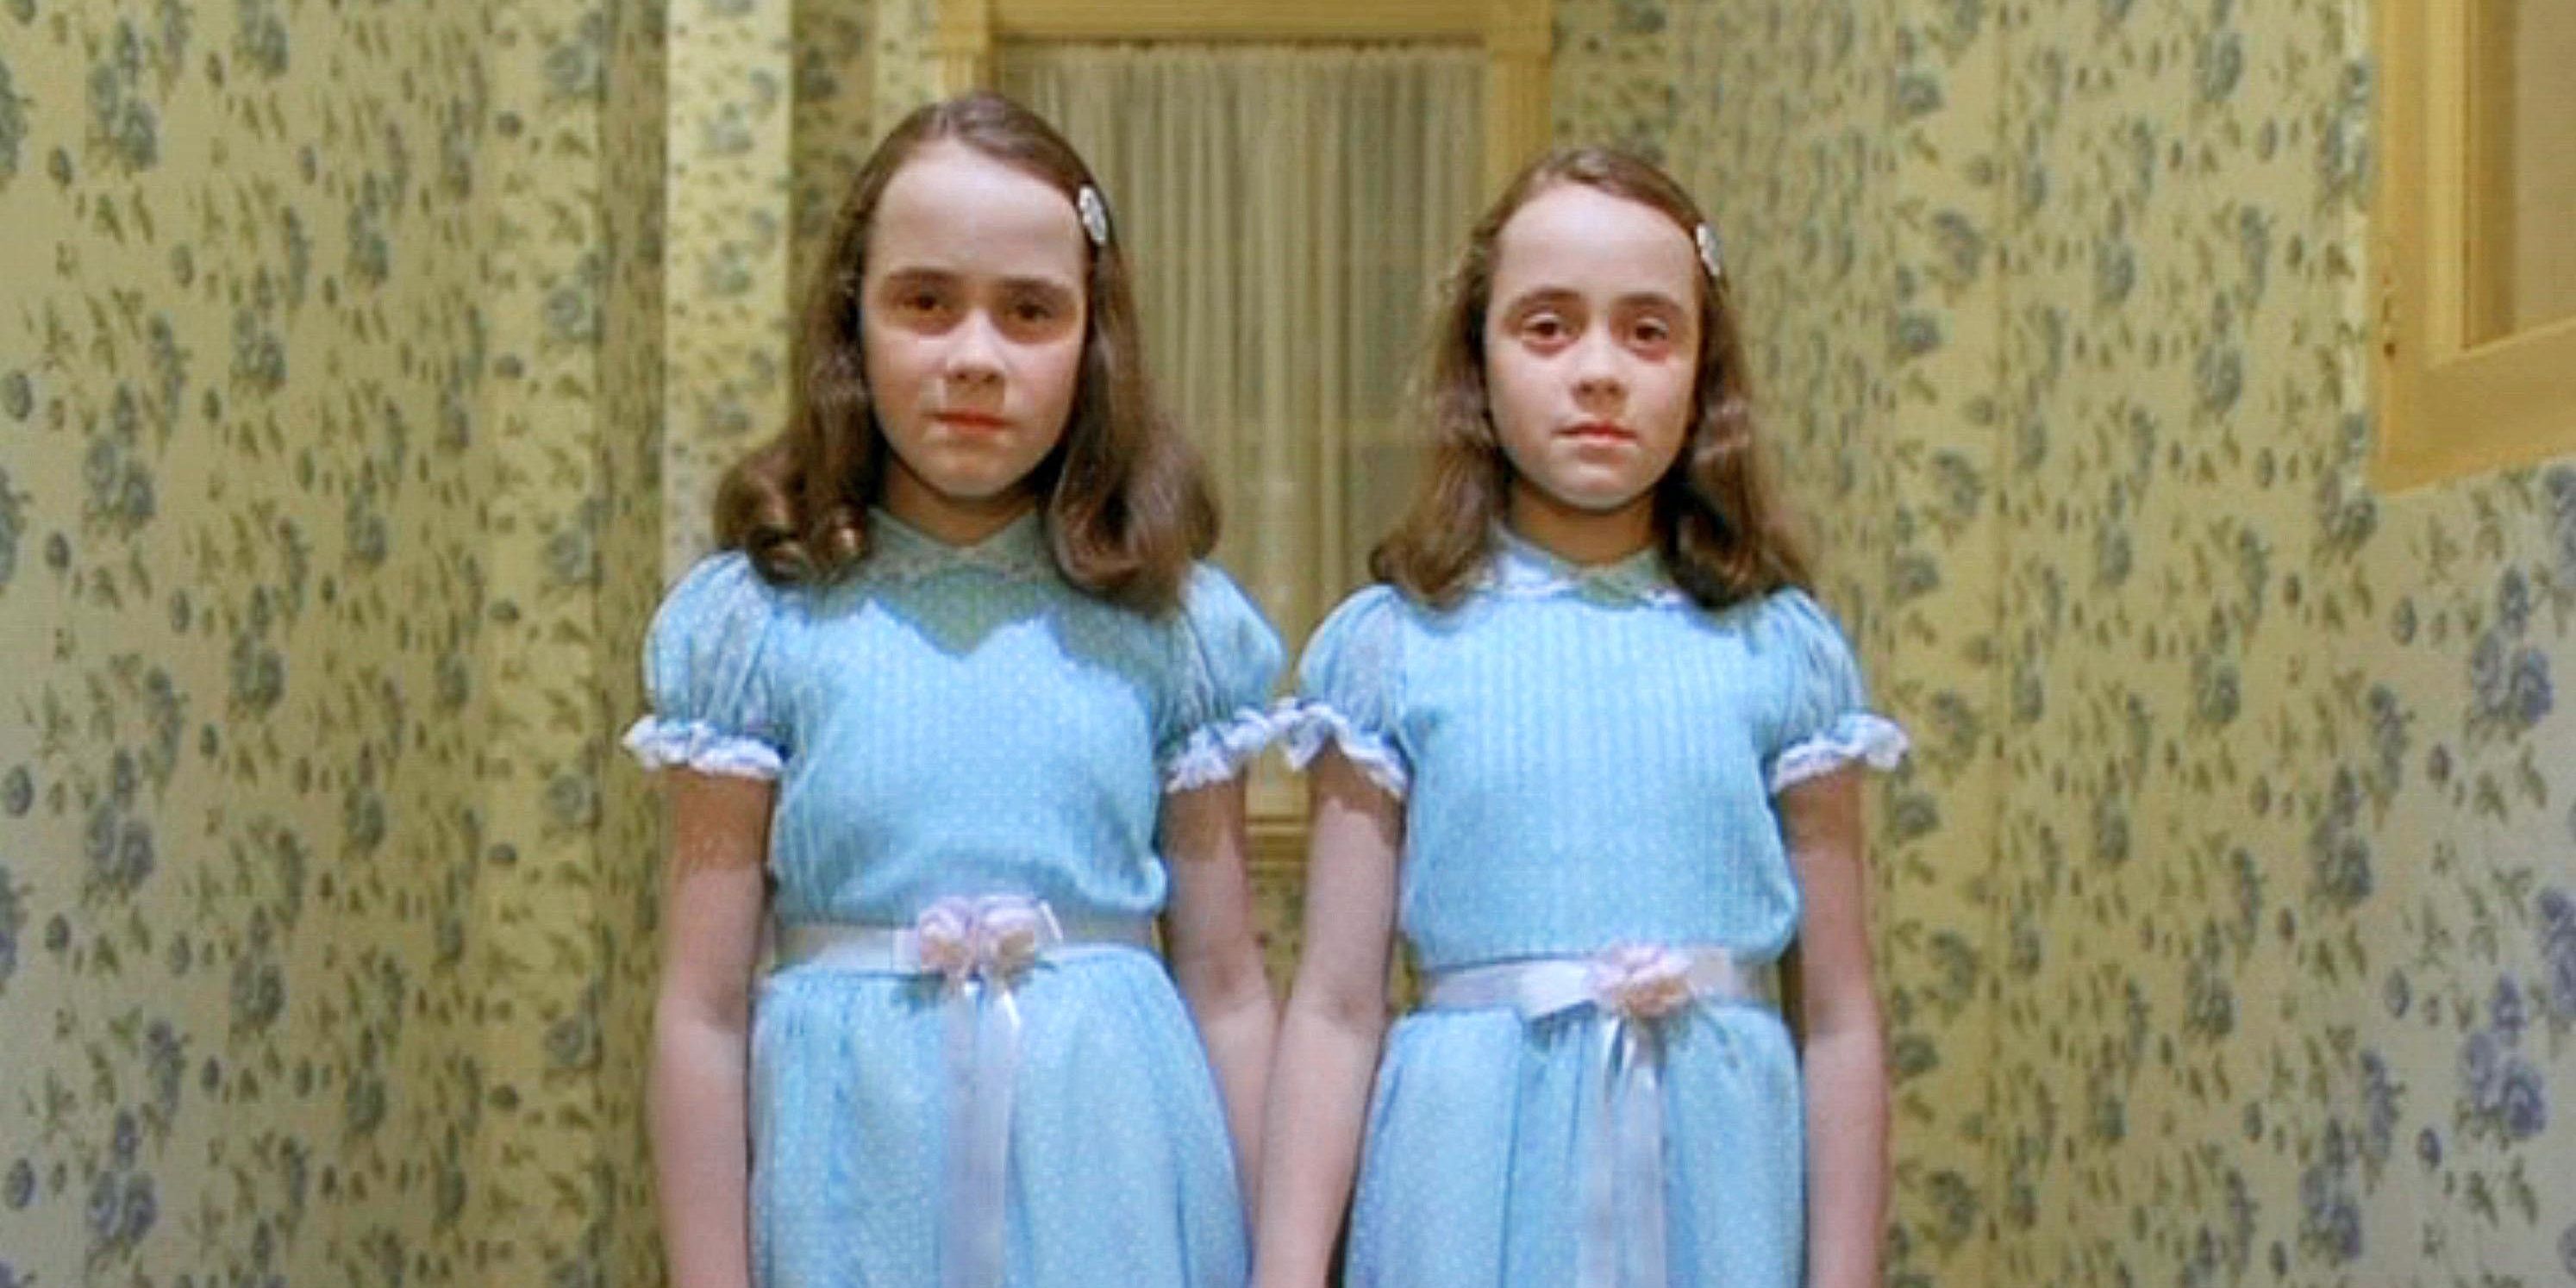 10 Most Lovable Ghosts in Horror Movie History